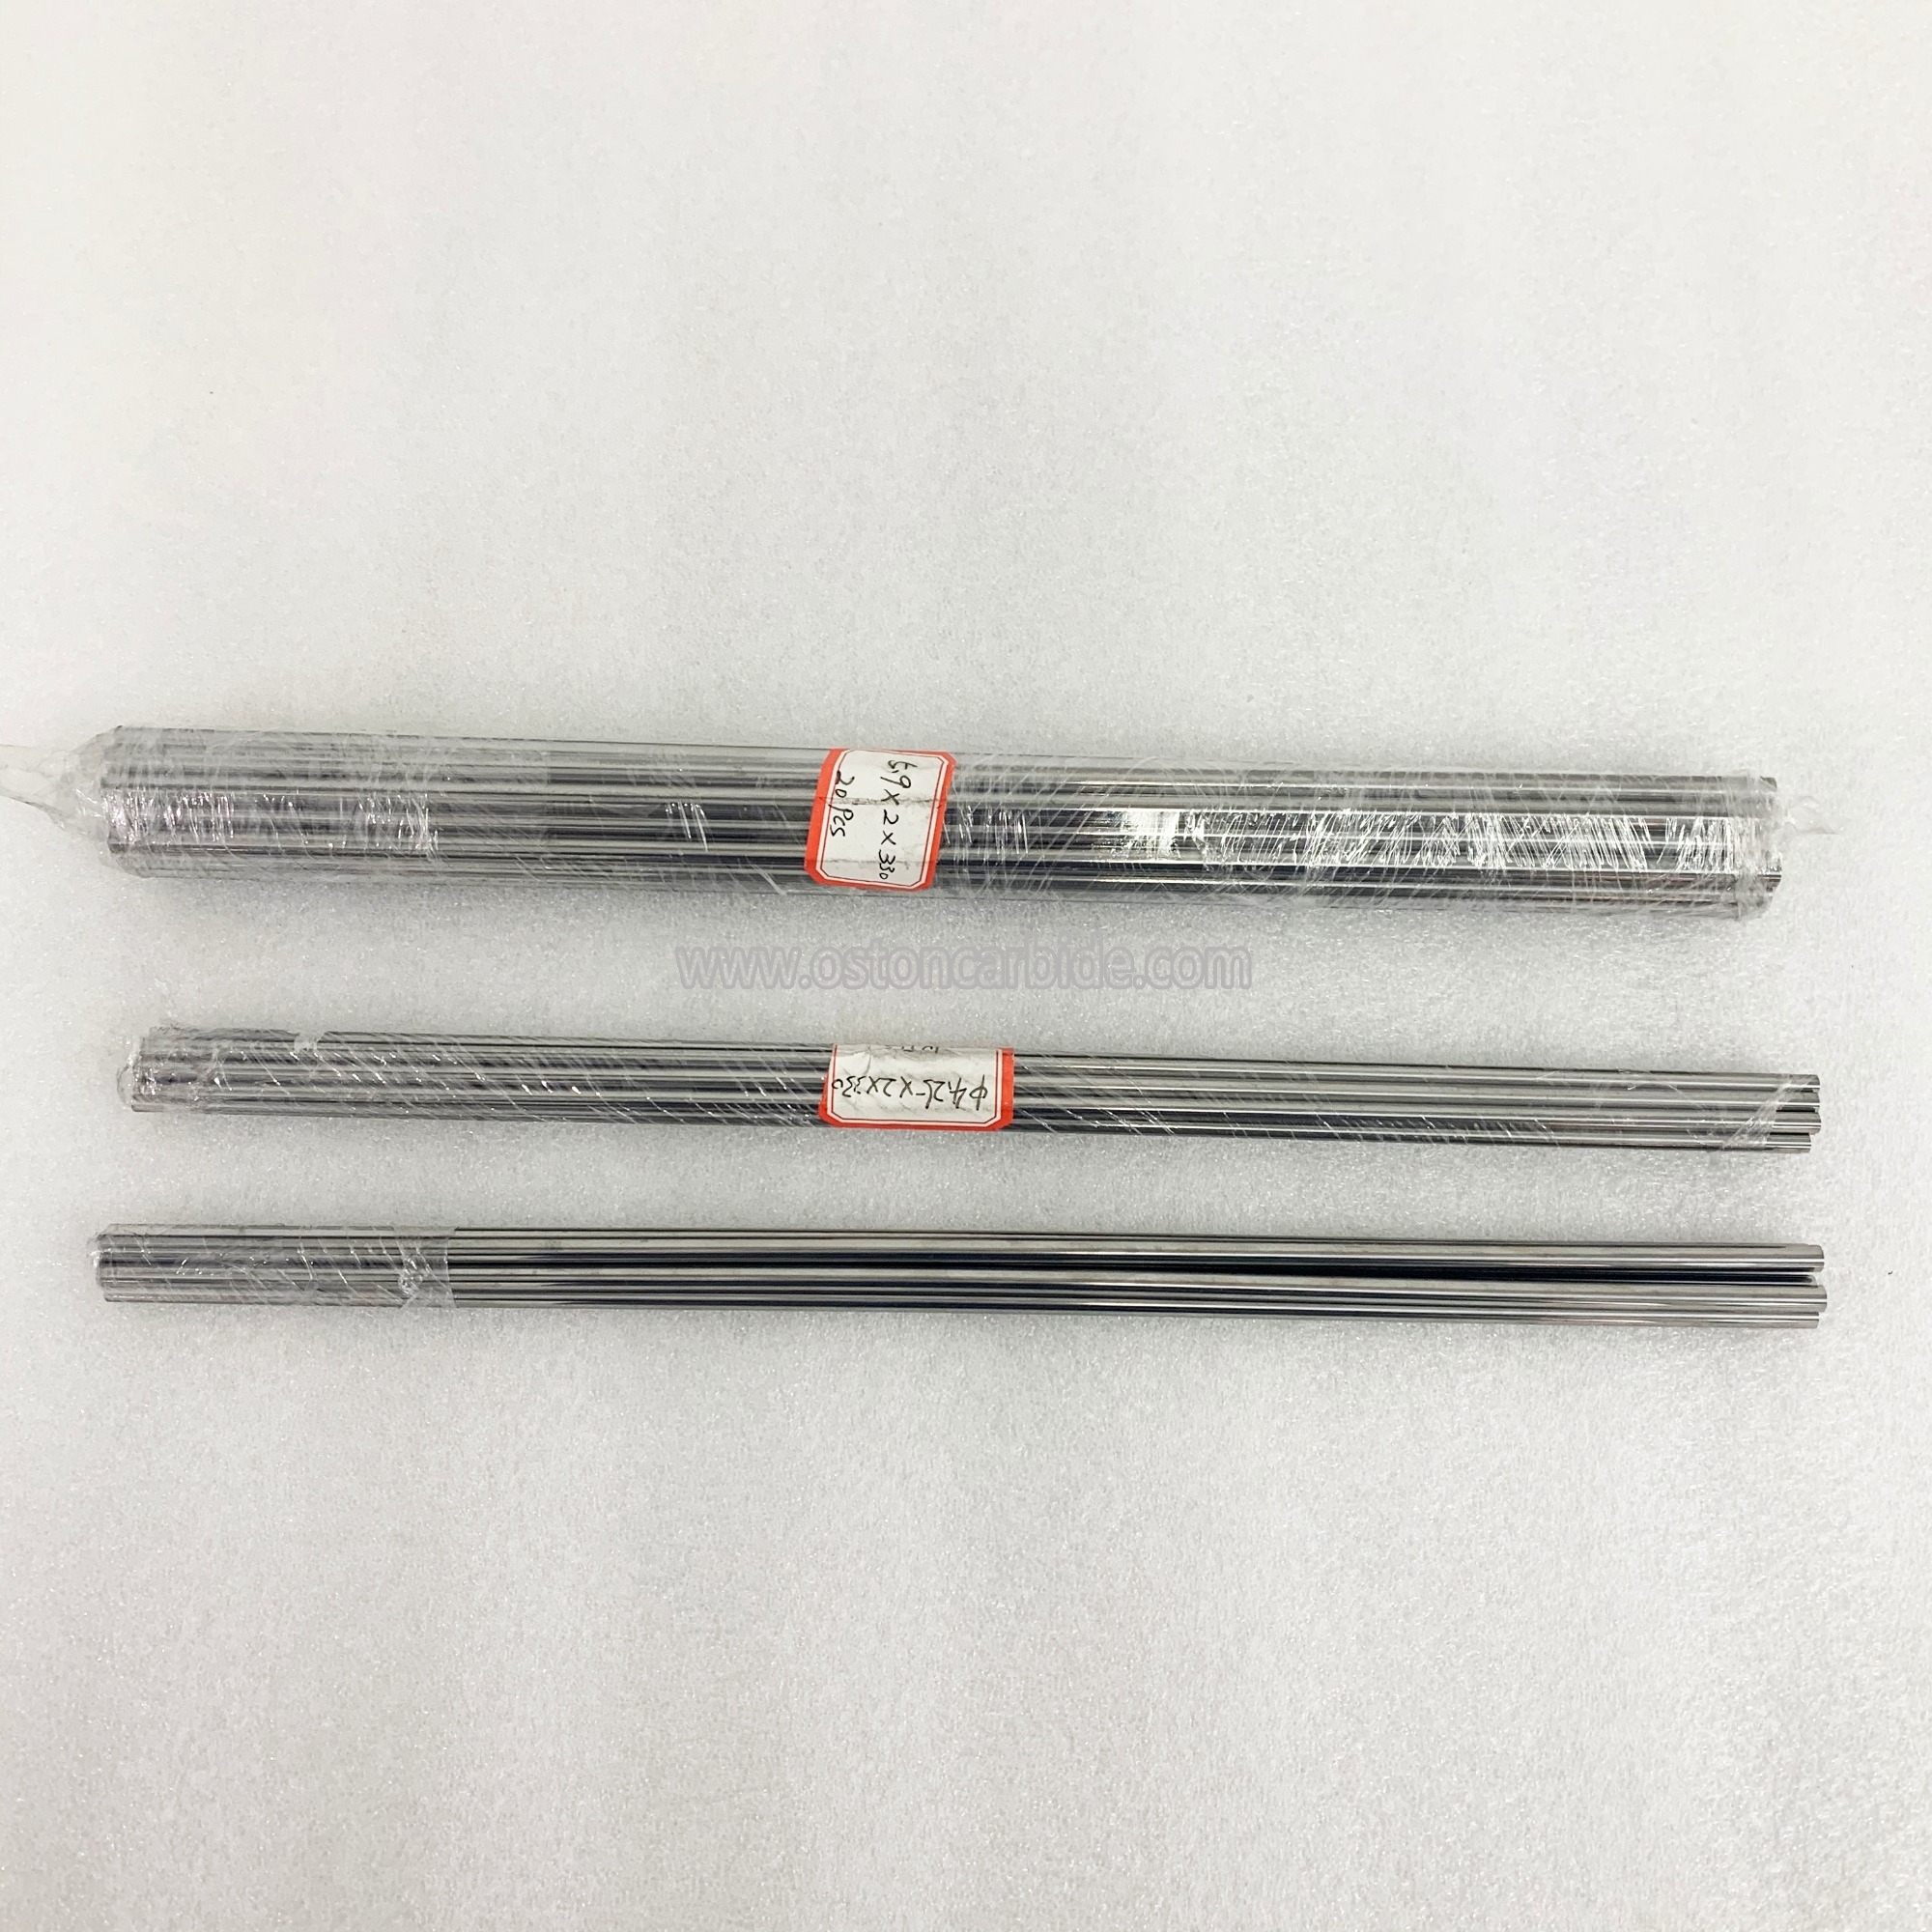 Tungsten Carbide Rods with One Central Straight Coolant Hole